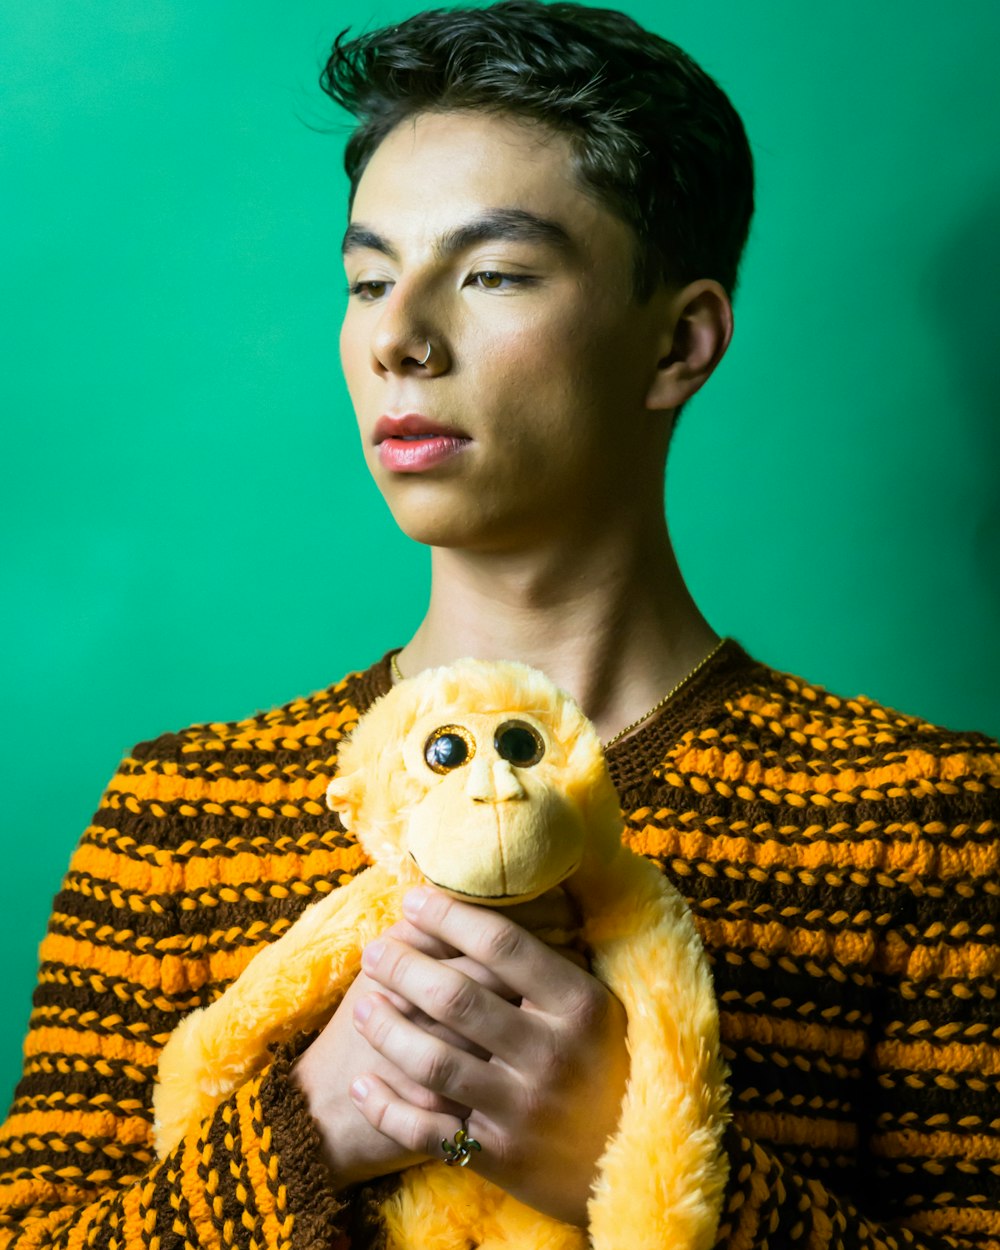 a young man holding a yellow teddy bear